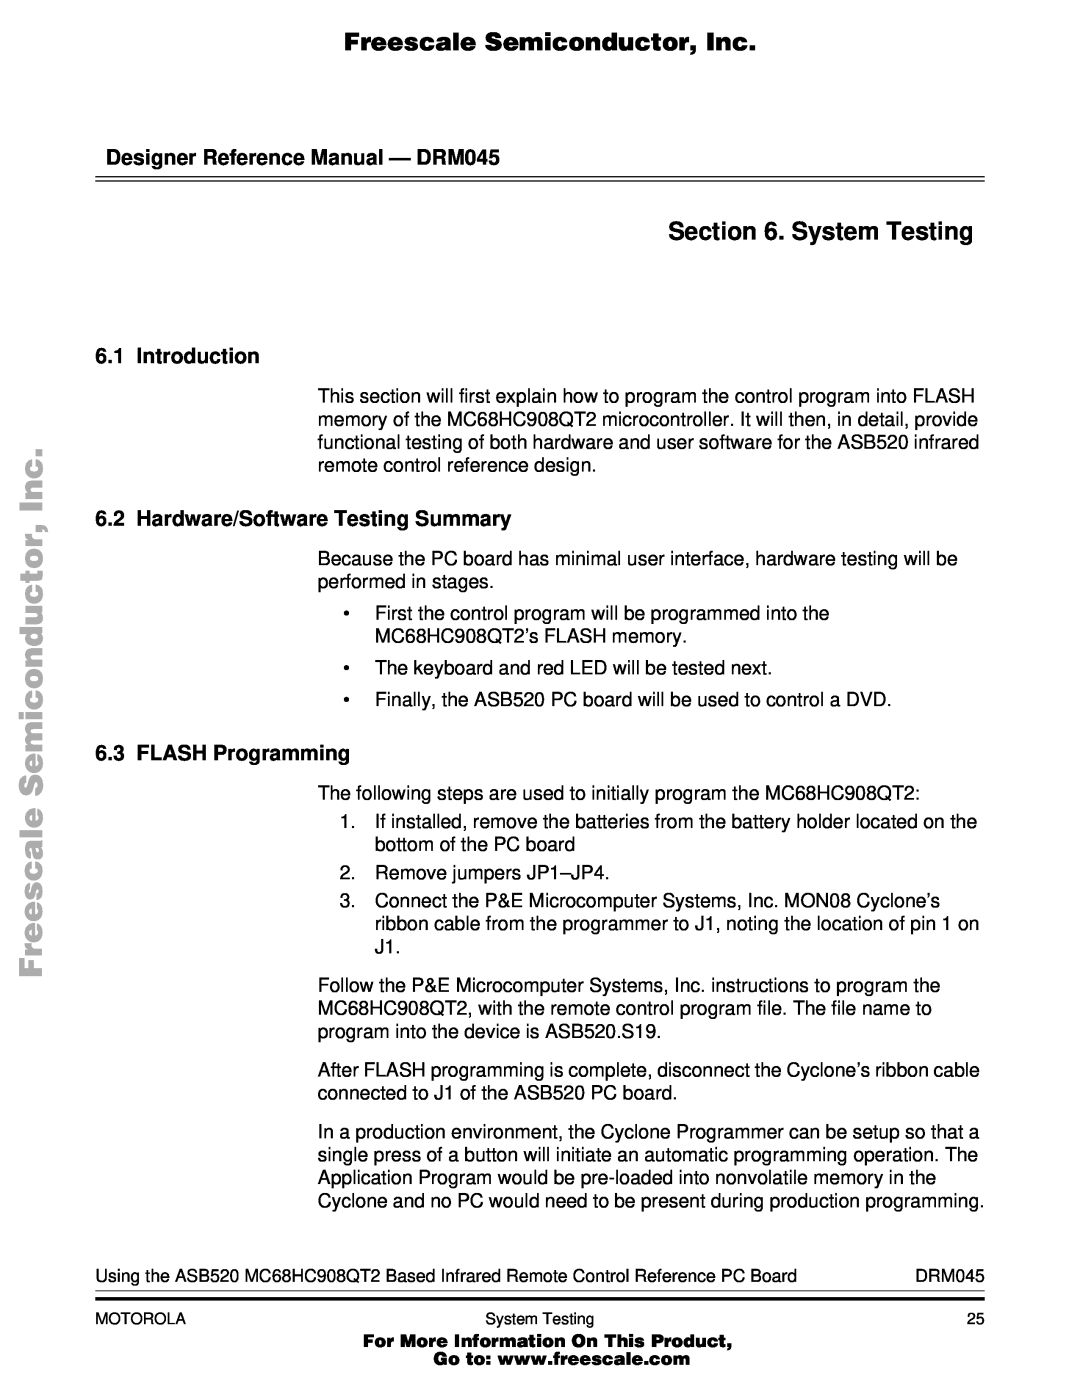 Freescale Semiconductor MC68HC908QT2 System Testing, Introduction, Hardware/Software Testing Summary, 6.3FLASH Programming 